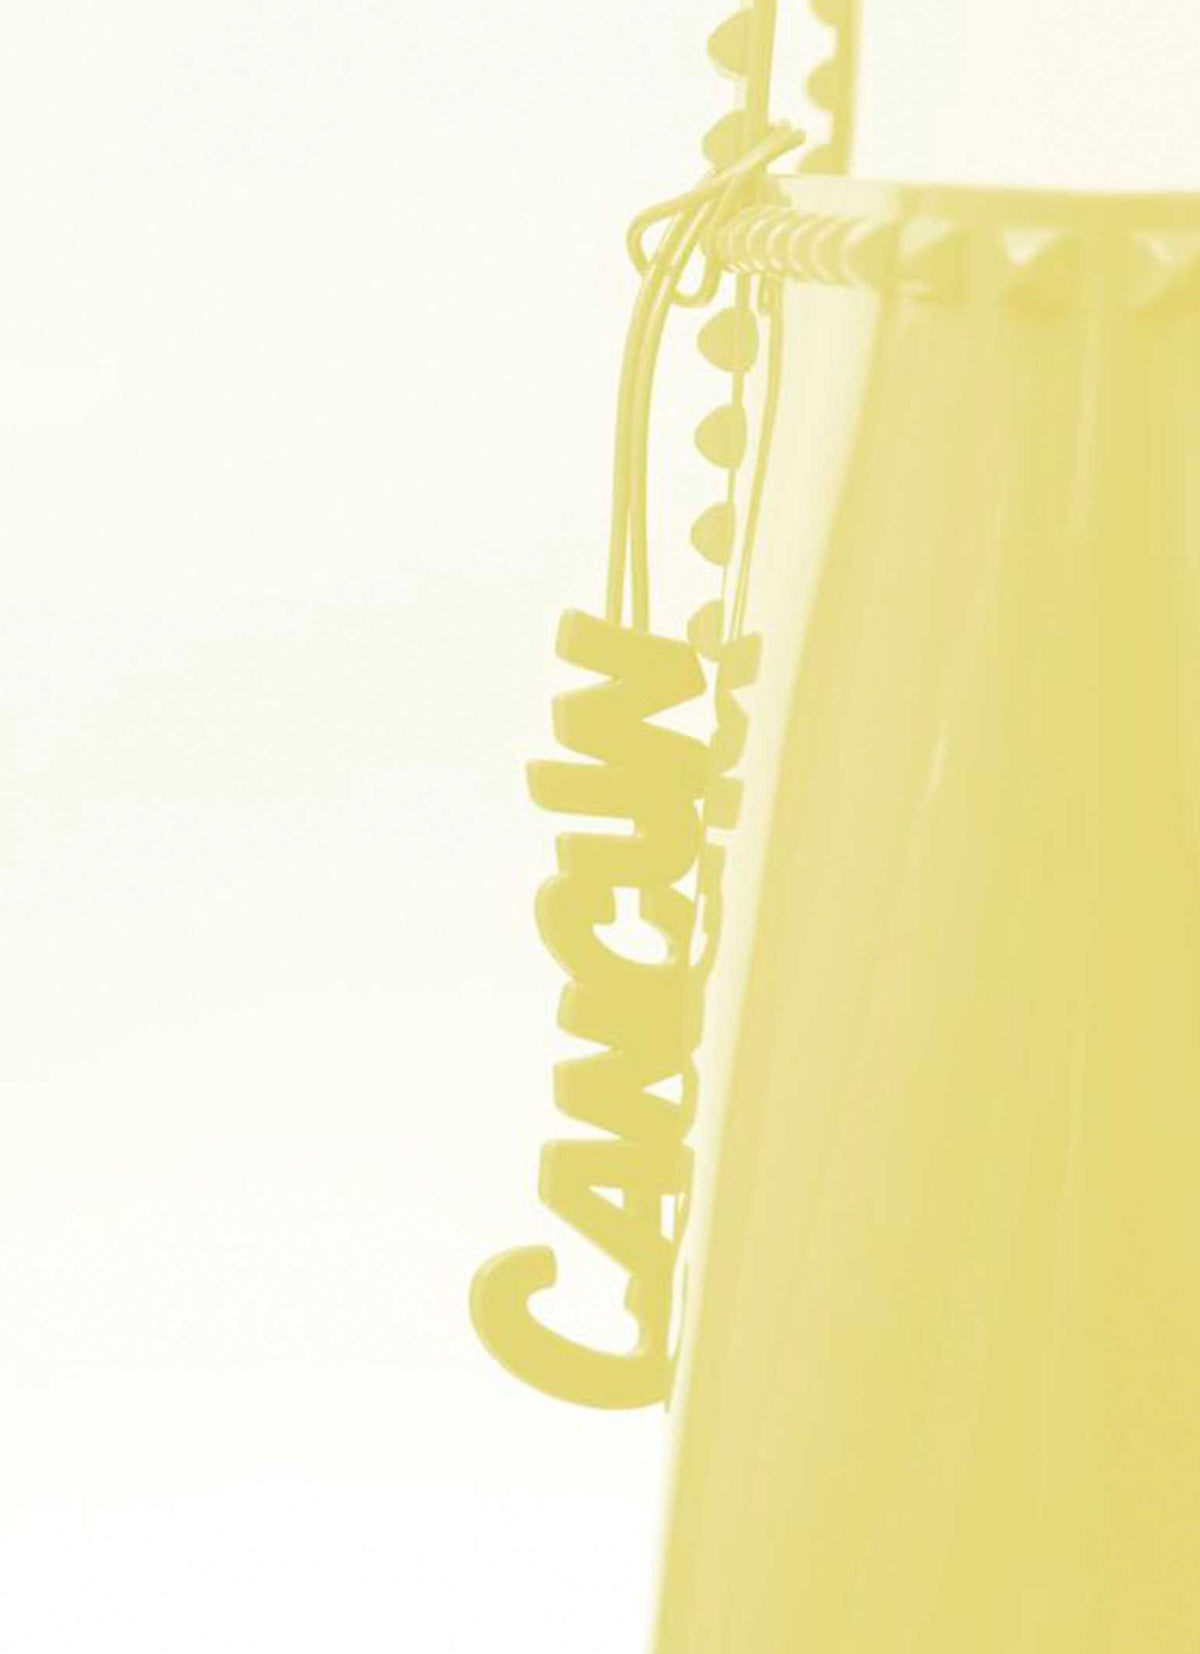 Recyclable Carmen Sol Cancun jelly tote bag charmS in color baby yellow